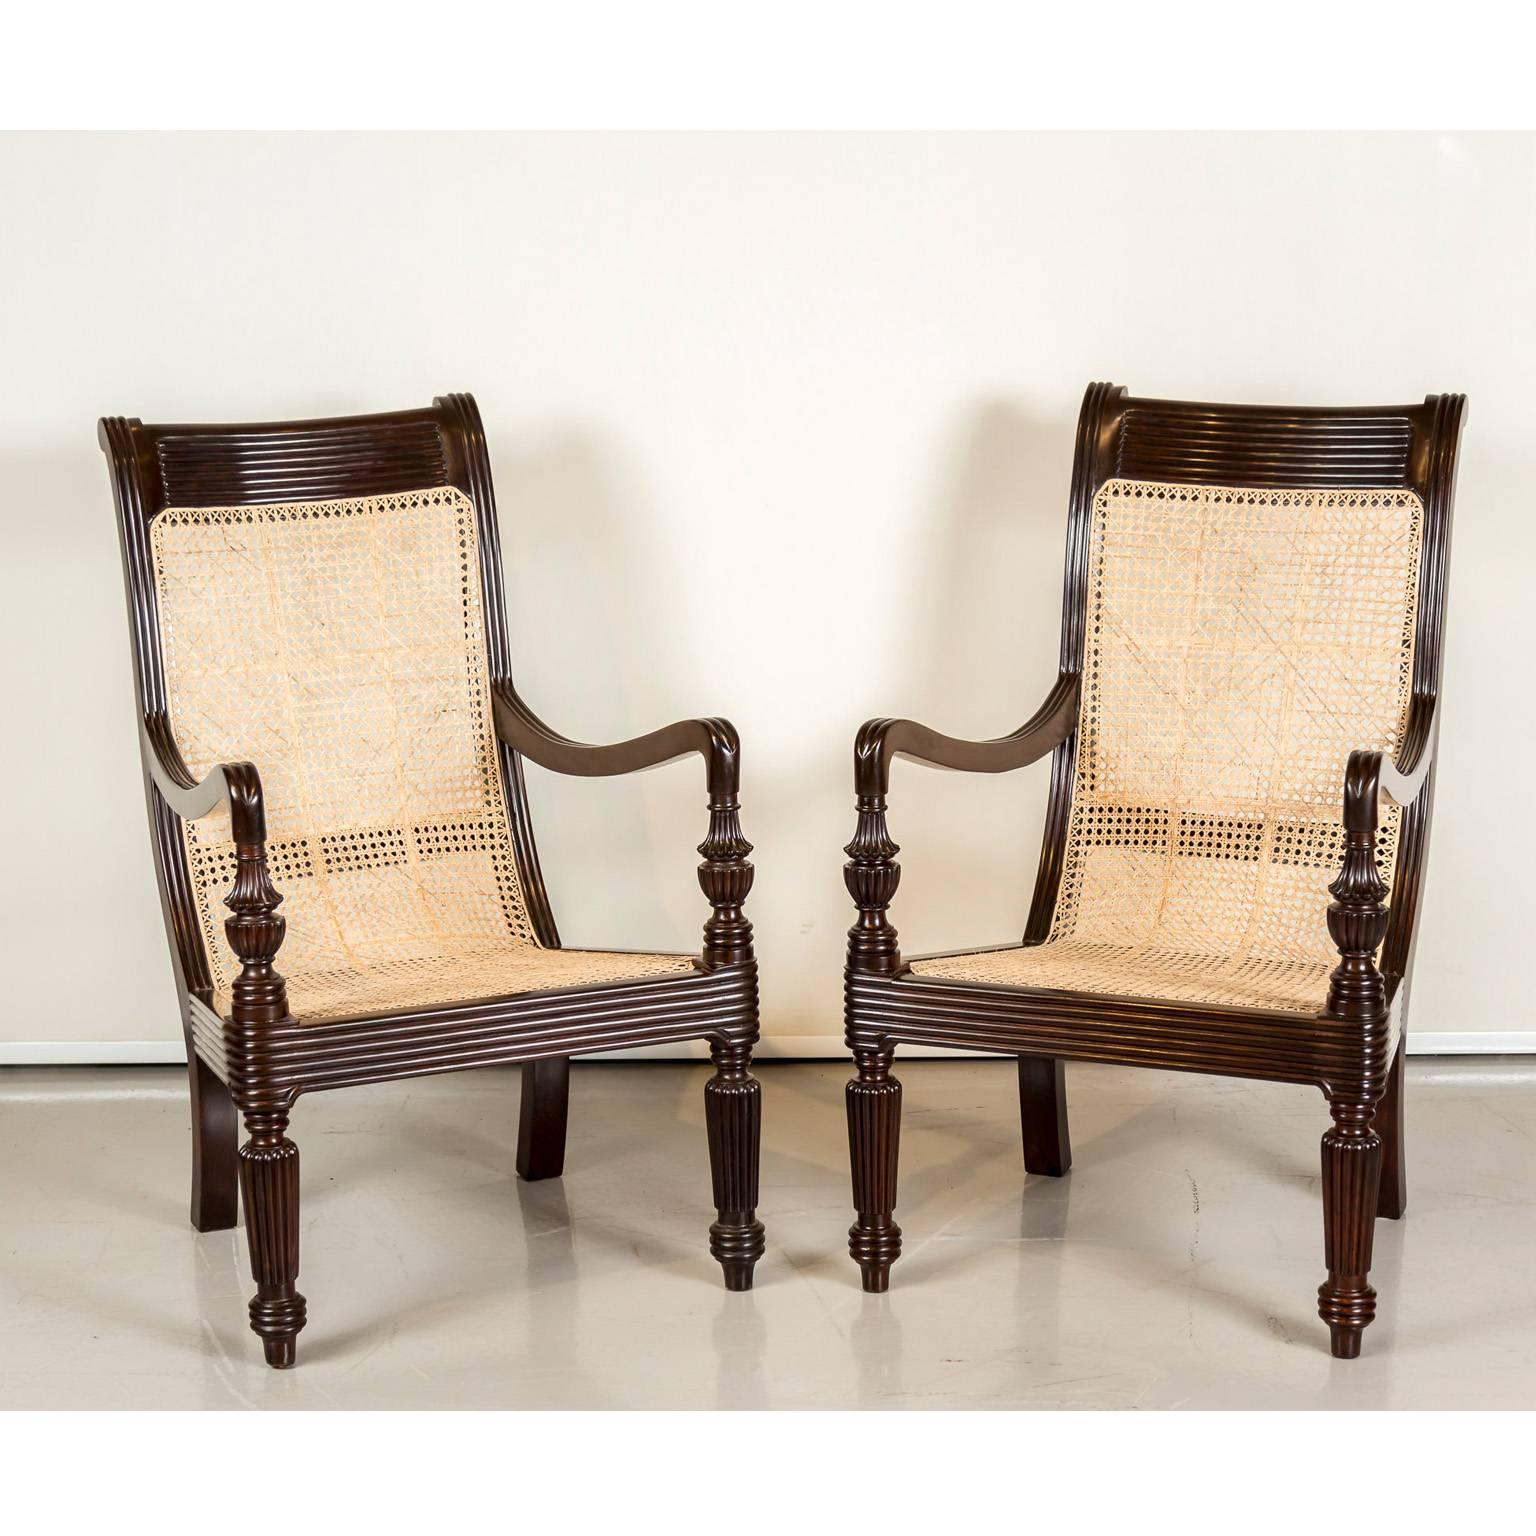 A pair of British colonial library chairs in rosewood with hand caned seat and back. The top rail and seat apron are reeded and the arms rest on flared tassel and ball supports. The front legs with multiple turnings and the rear legs slightly raked